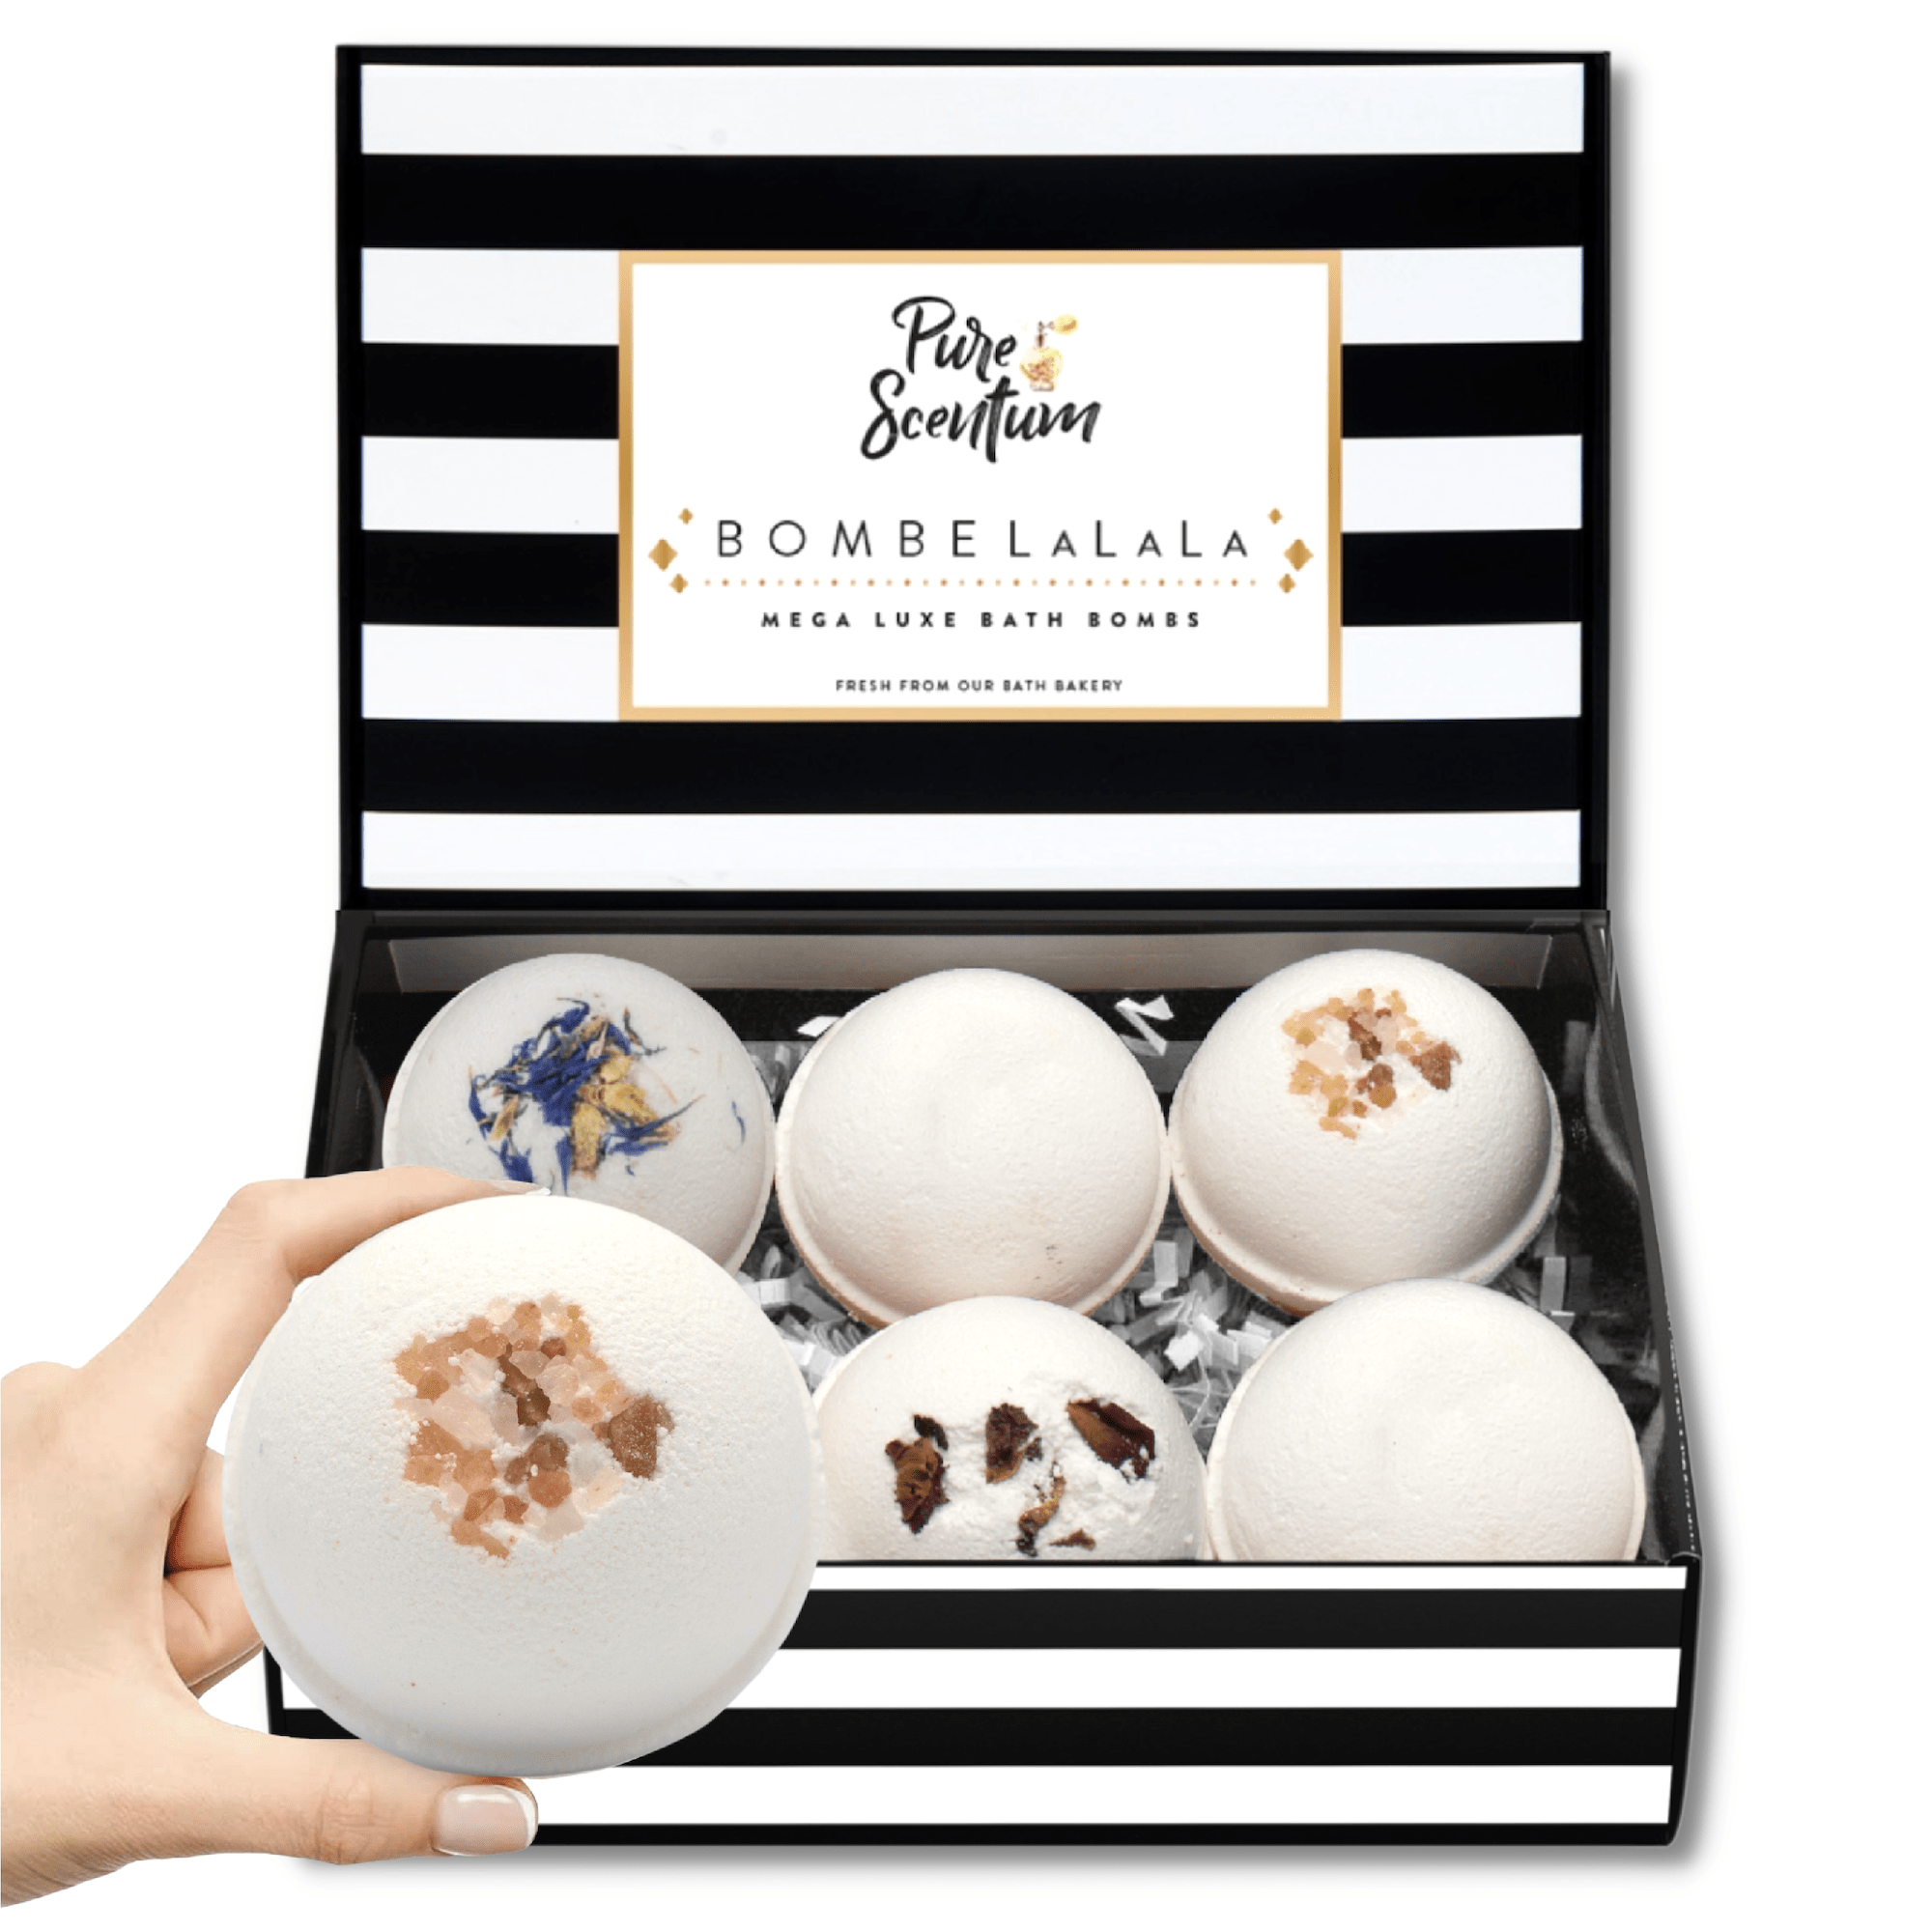 Pure scentum all natural bath bombs